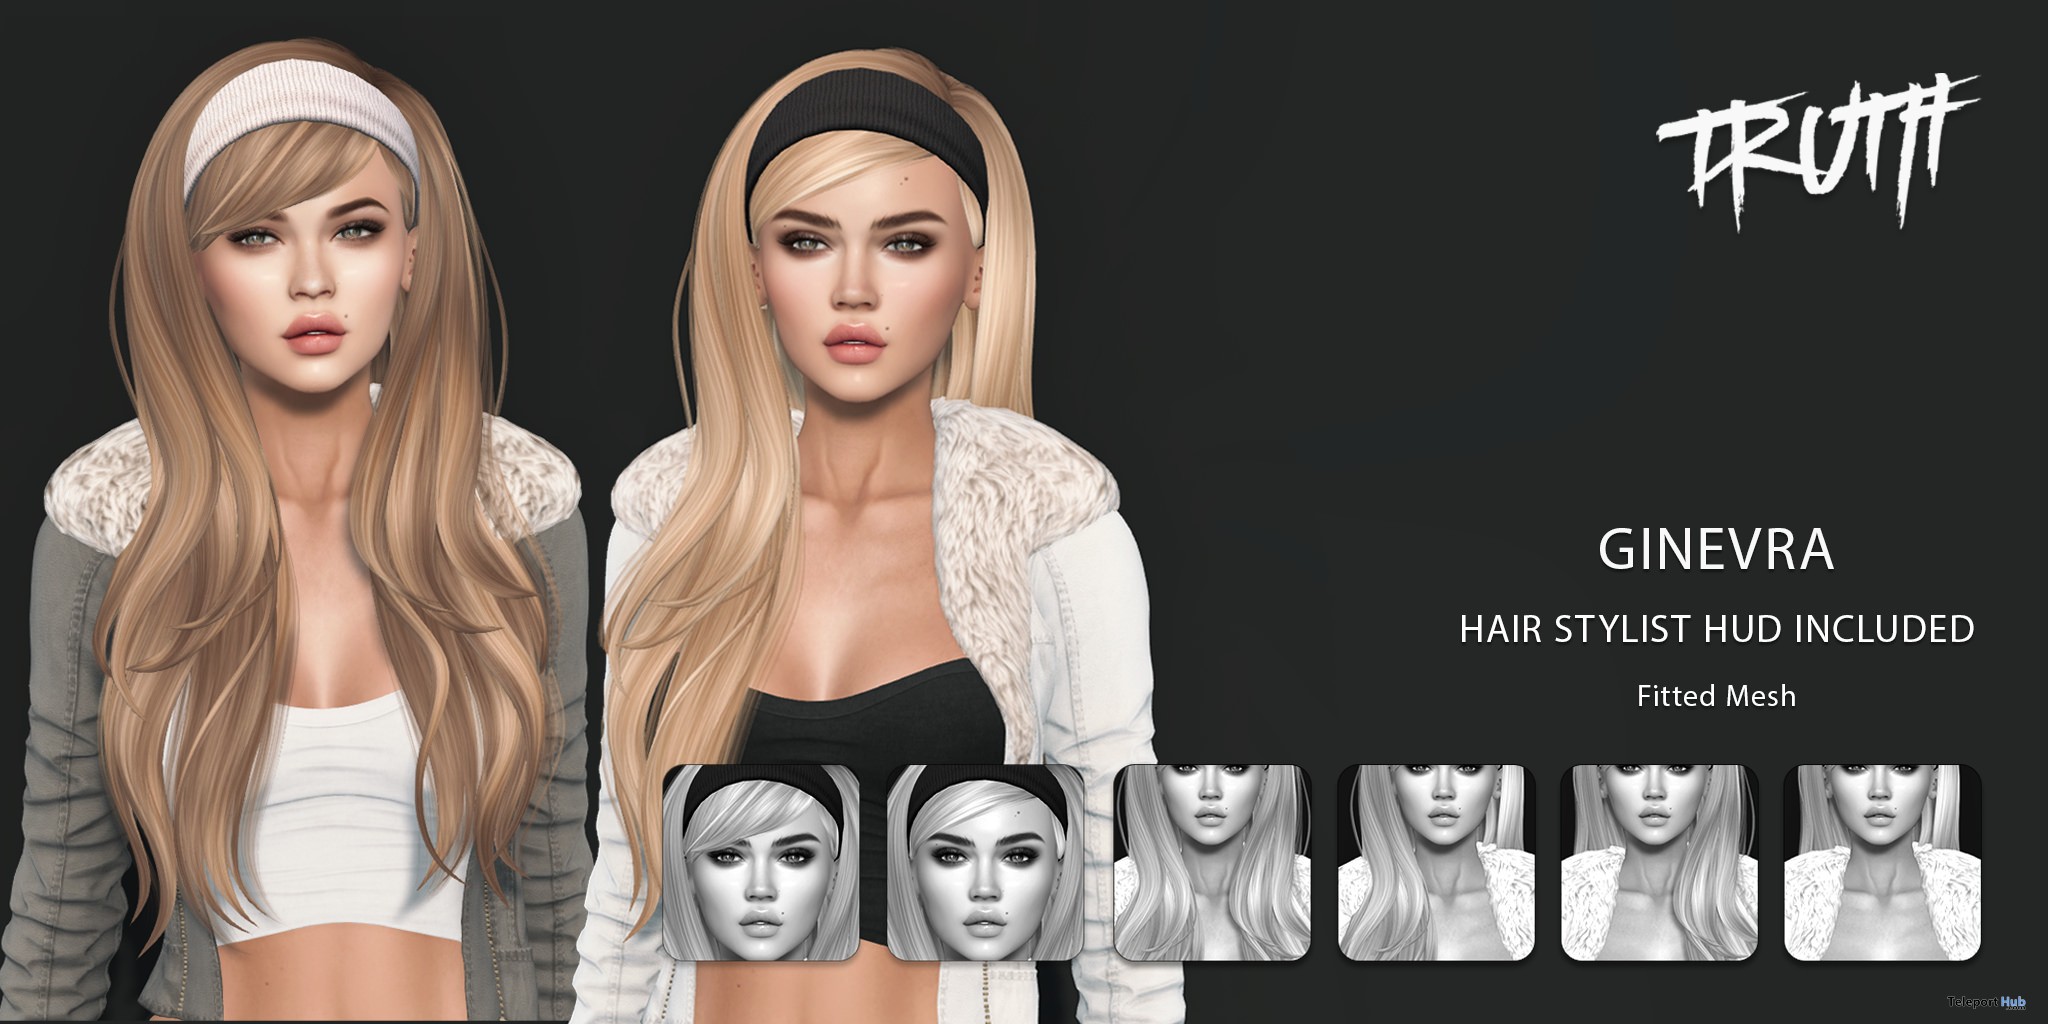 Ginevra Hair FatPack With Style HUD December 2017 Group Gift by TRUTH HAIR - Teleport Hub - teleporthub.com